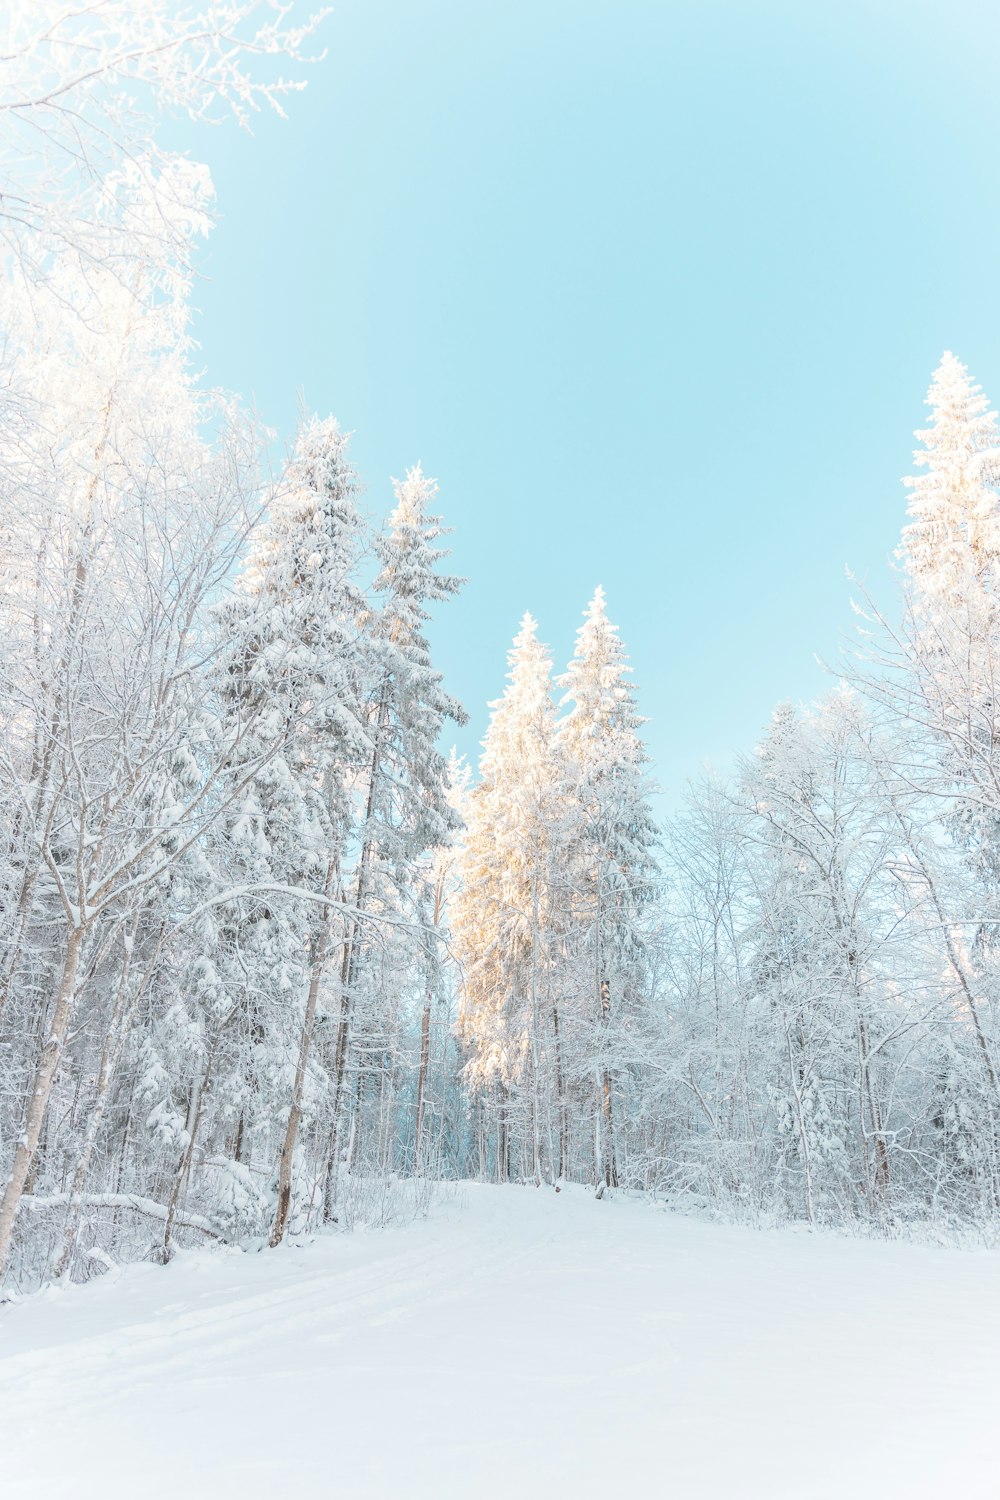 a snowy landscape with trees and a blue sky